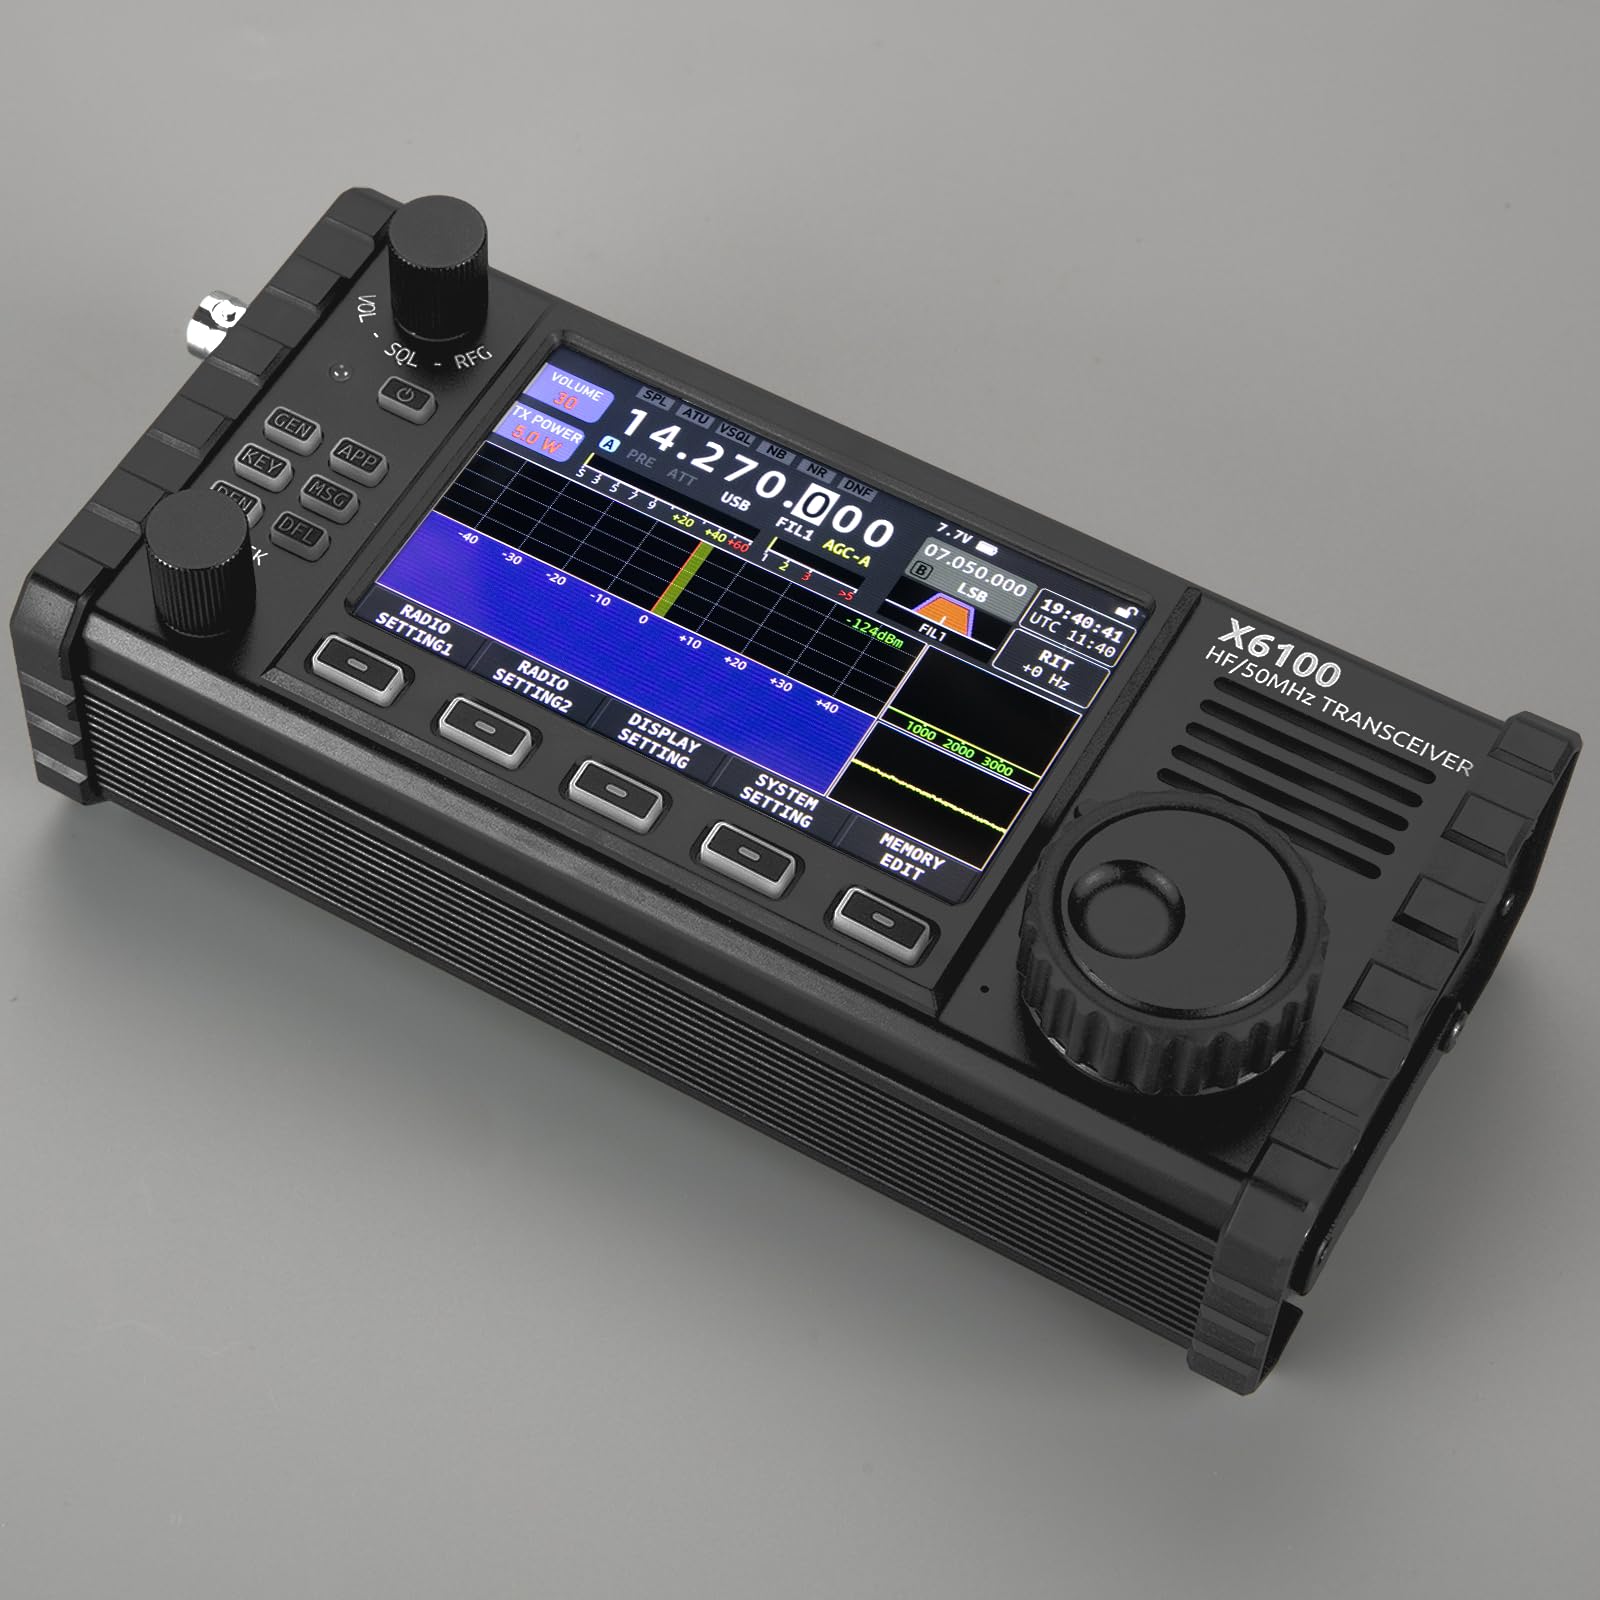 Xiegu X6100 HF Transceiver,SDR,10W,Full Mode,Built-in Battery,Portable Long Range Two-Way Radio